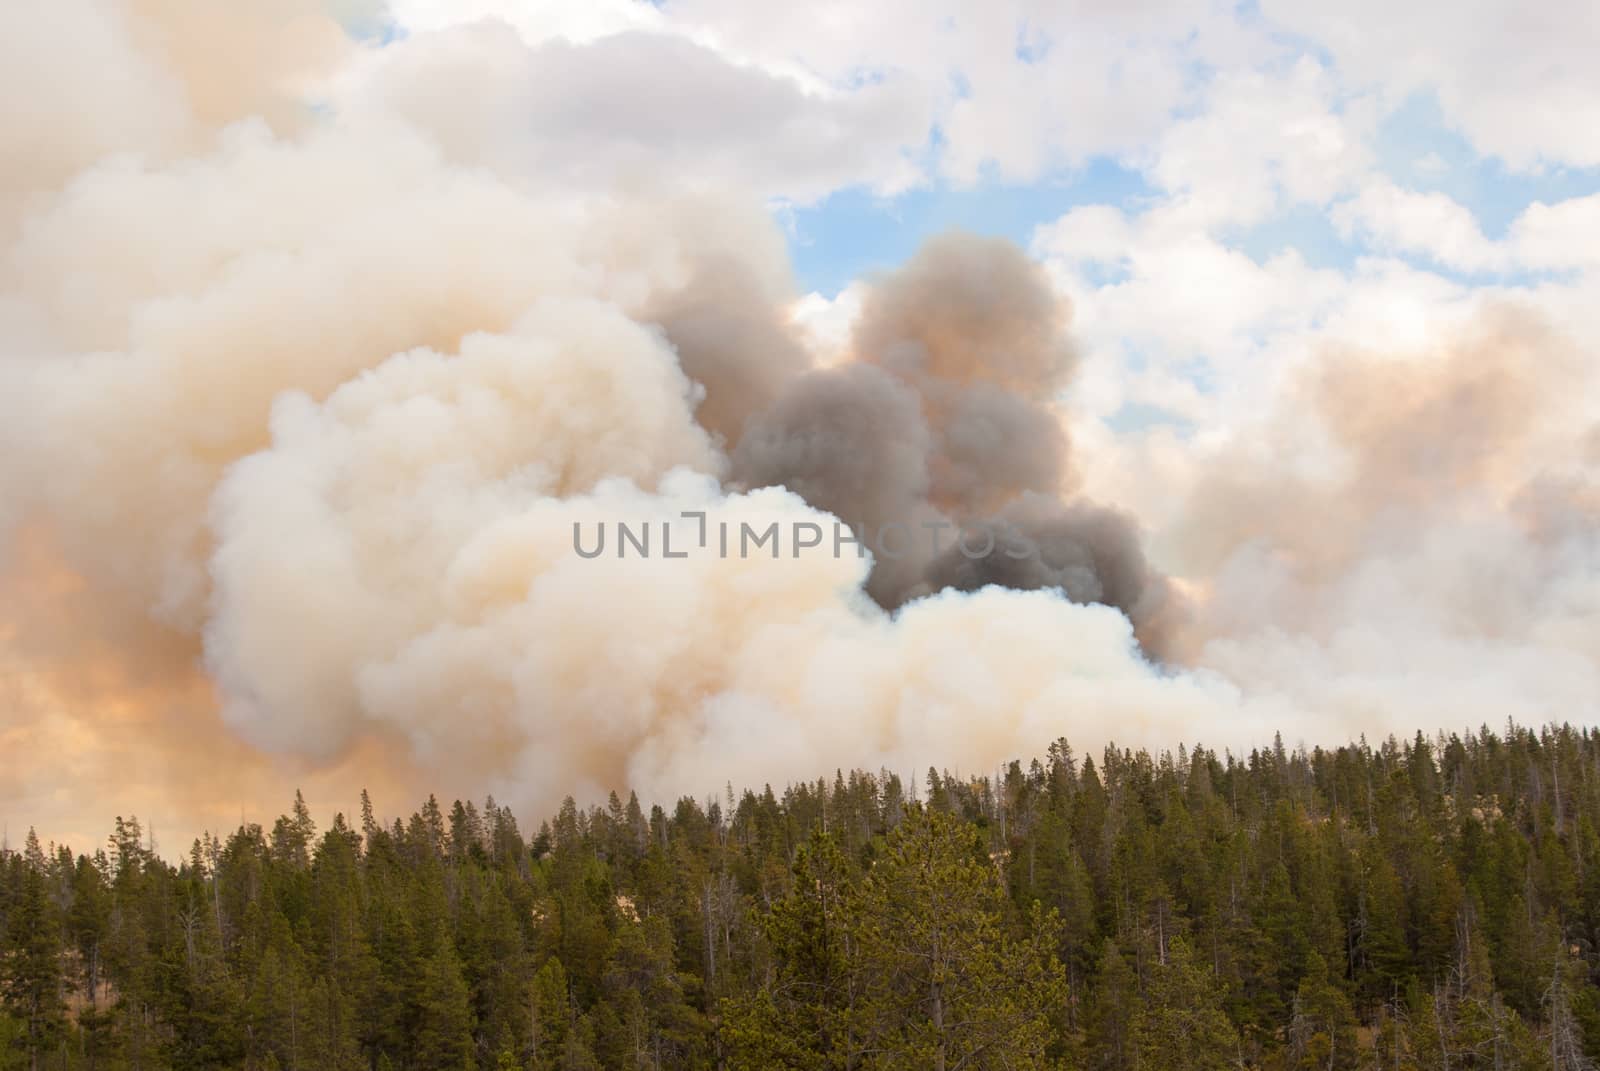 Fire takes hold in Yellowstone forests by emattil